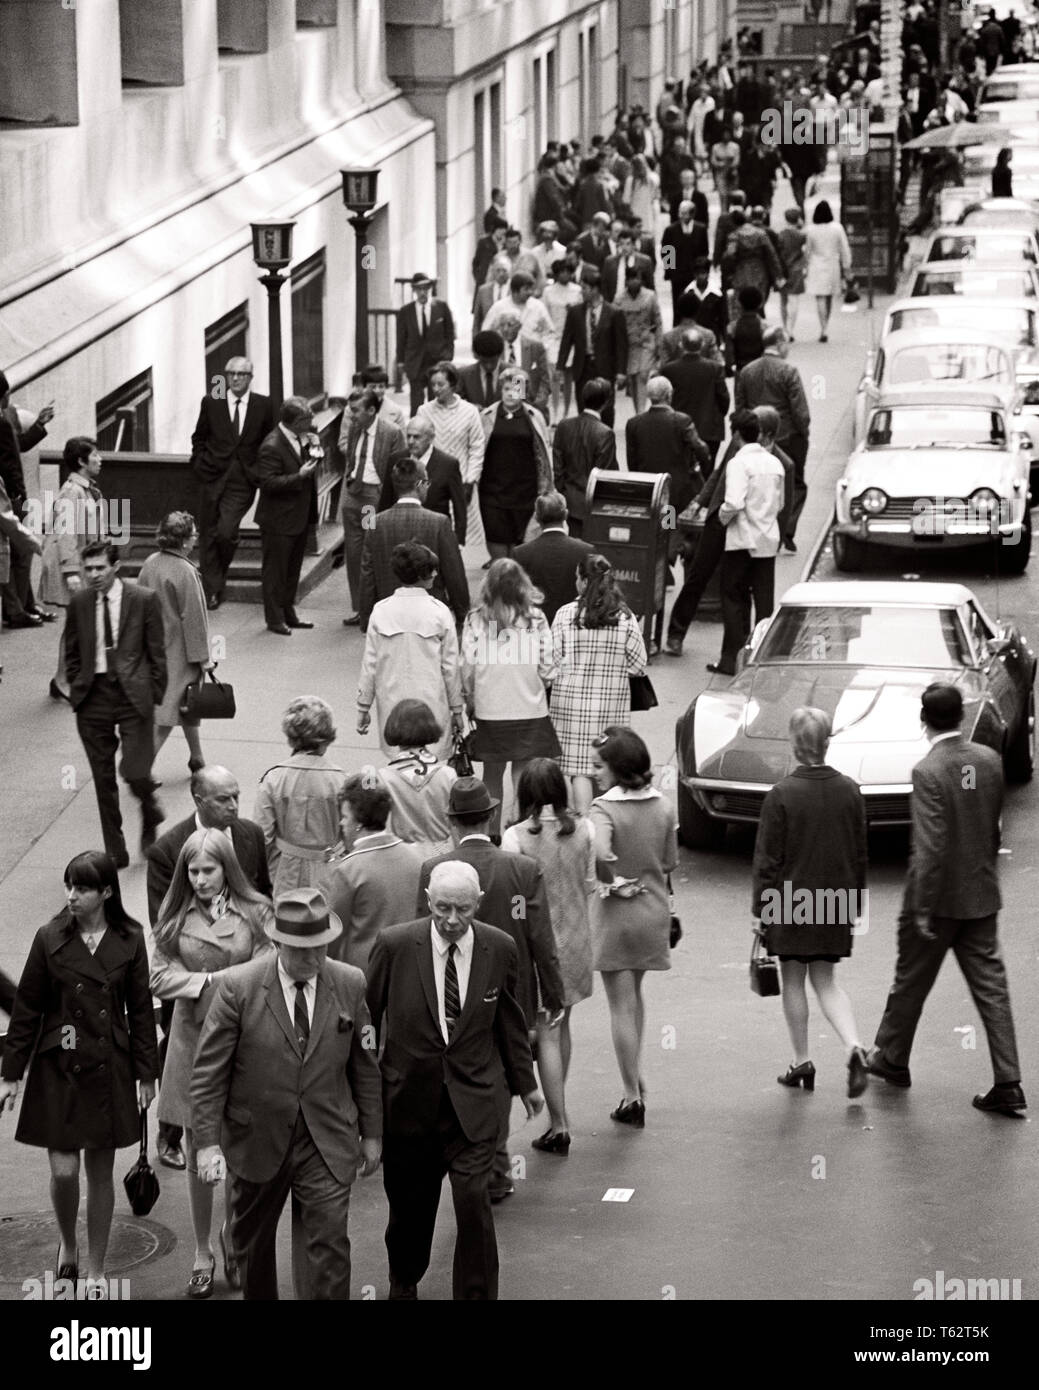 1970s CITY STREET FULL OF MEN AND WOMEN WORKERS  WALKING  CROSSING THE STREET COMMUTING - c10918 HAR001 HARS PEDESTRIANS TRANSPORTATION B&W GATHERING HIGH ANGLE AND AUTOS CONGESTED COMMUTING OCCUPATIONS AUTOMOBILES VEHICLES COOPERATION THRONG BLACK AND WHITE CAUCASIAN ETHNICITY HAR001 OLD FASHIONED Stock Photo